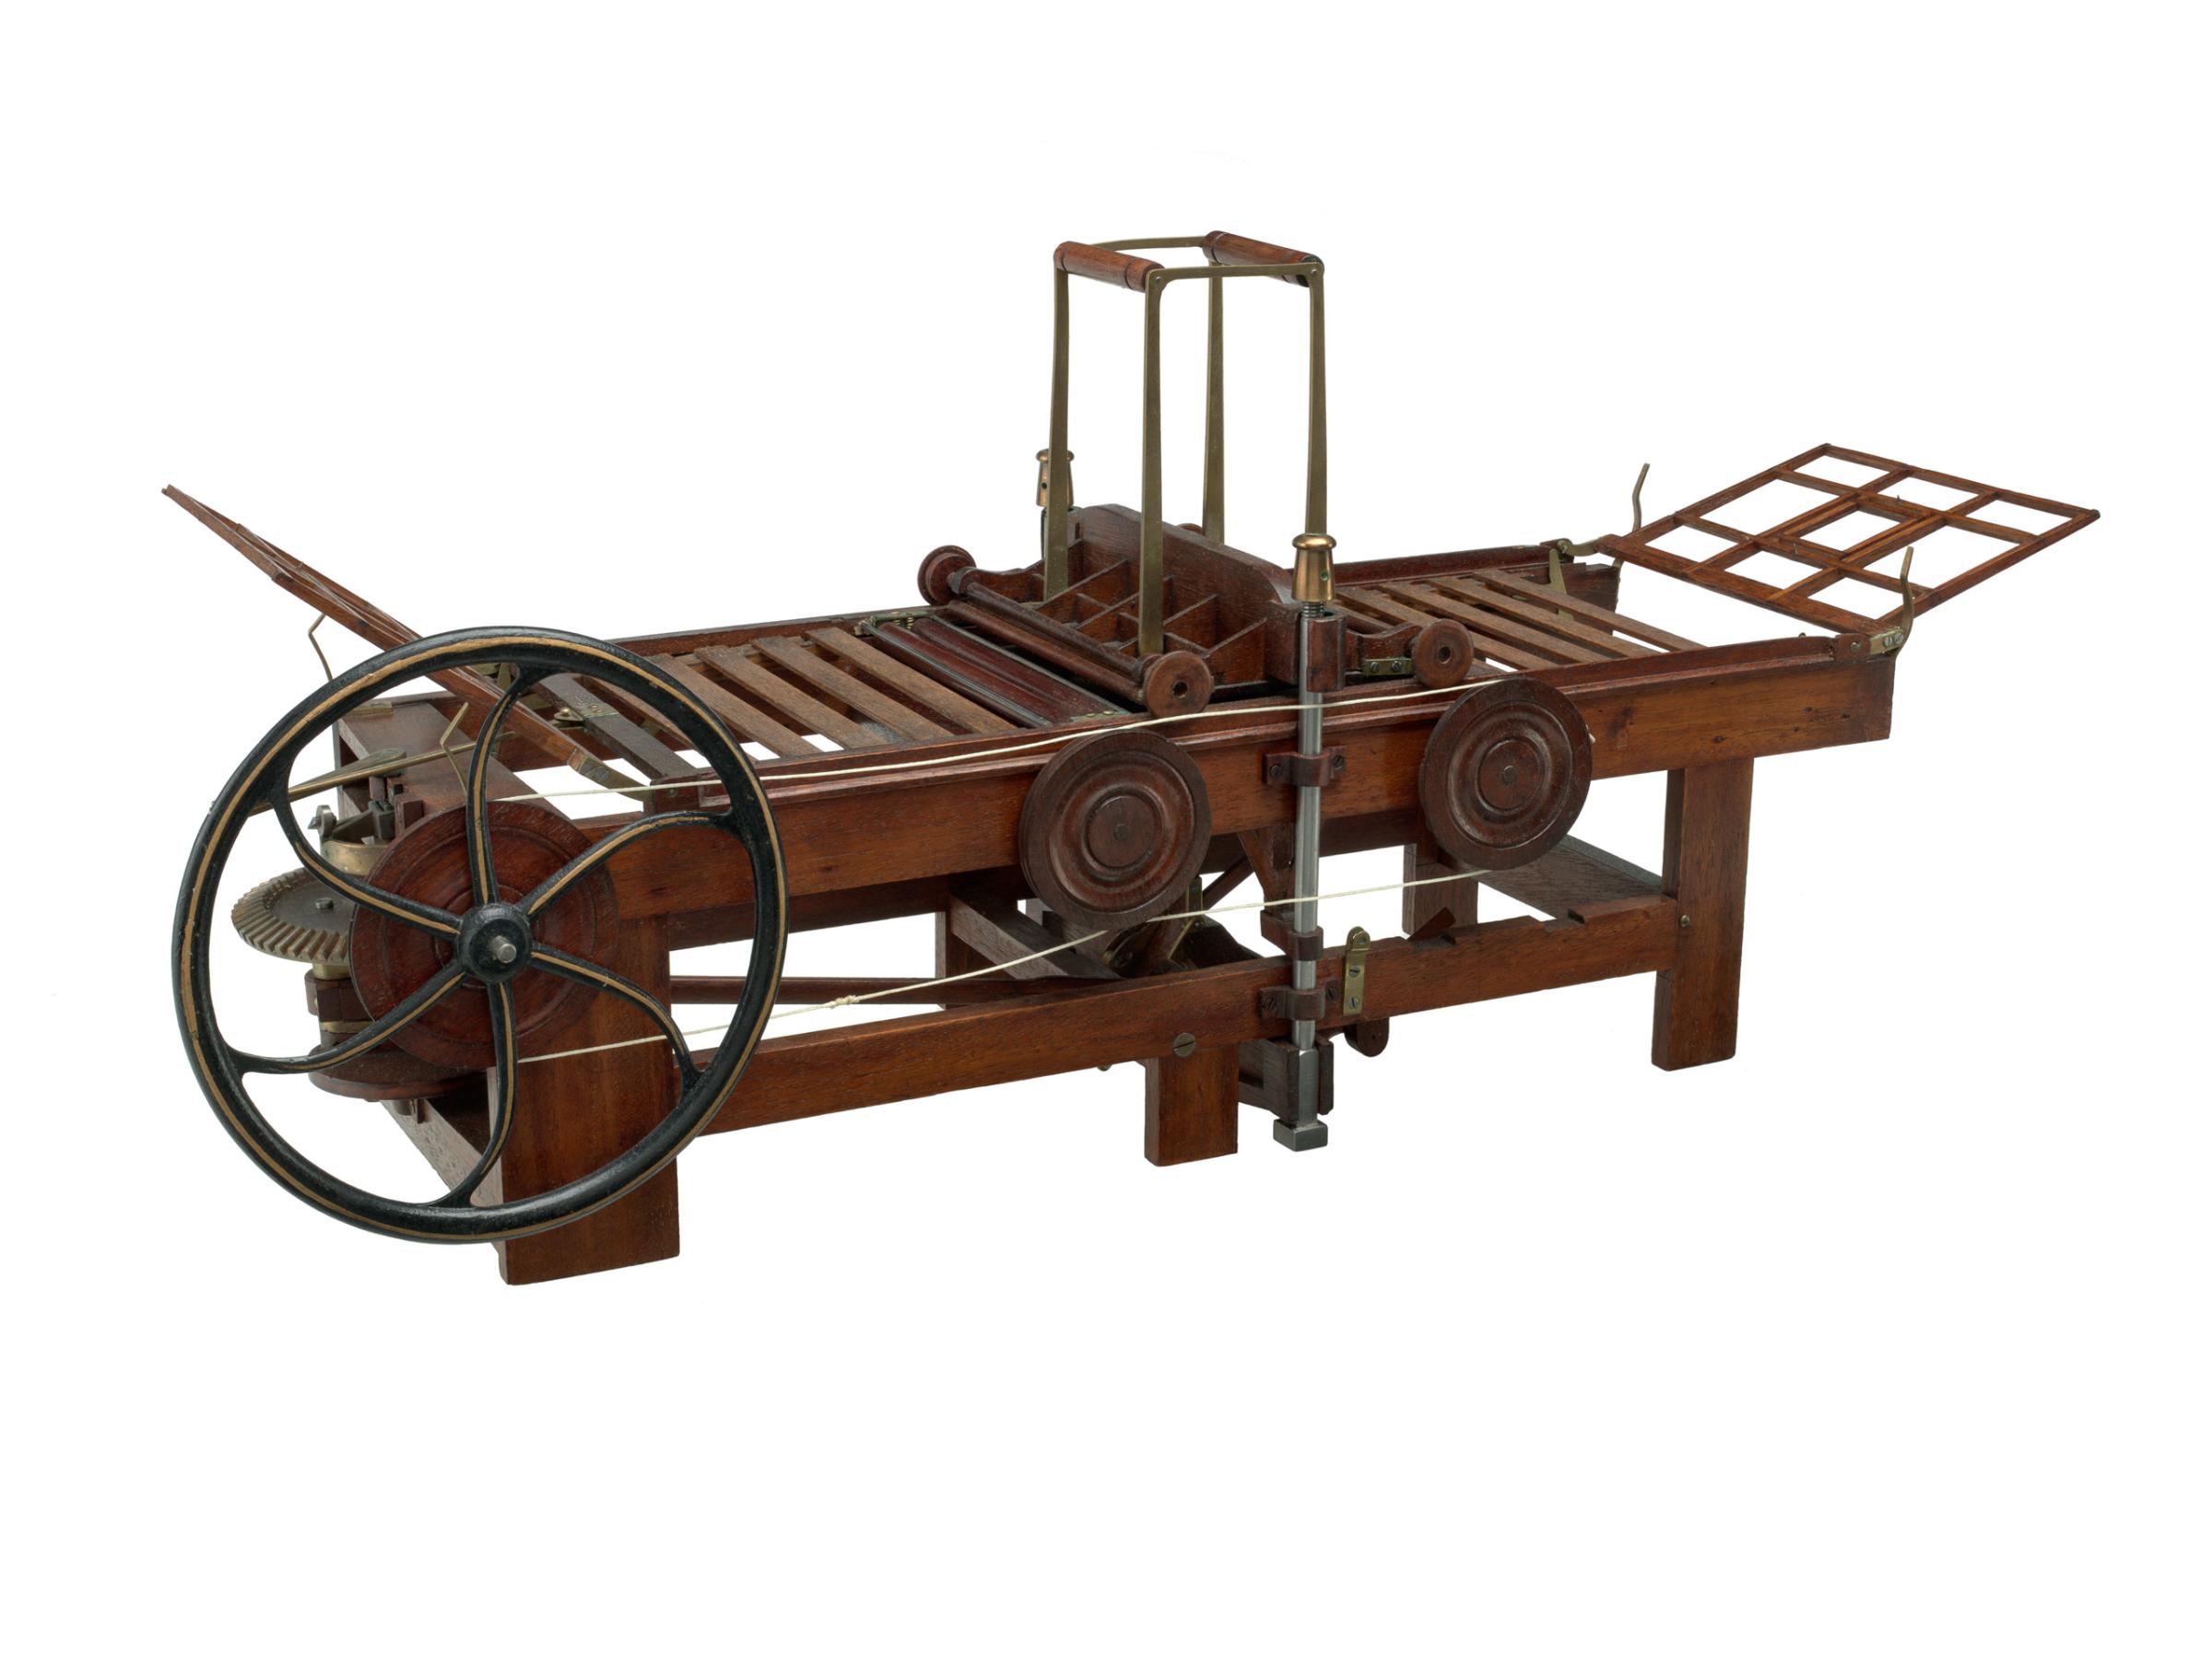 The style of bed and platen printing press in this patent model inspired Issac Adams’ design of the later Adams Power Press, which was praised by early 19th century printers for its production of quality book work.